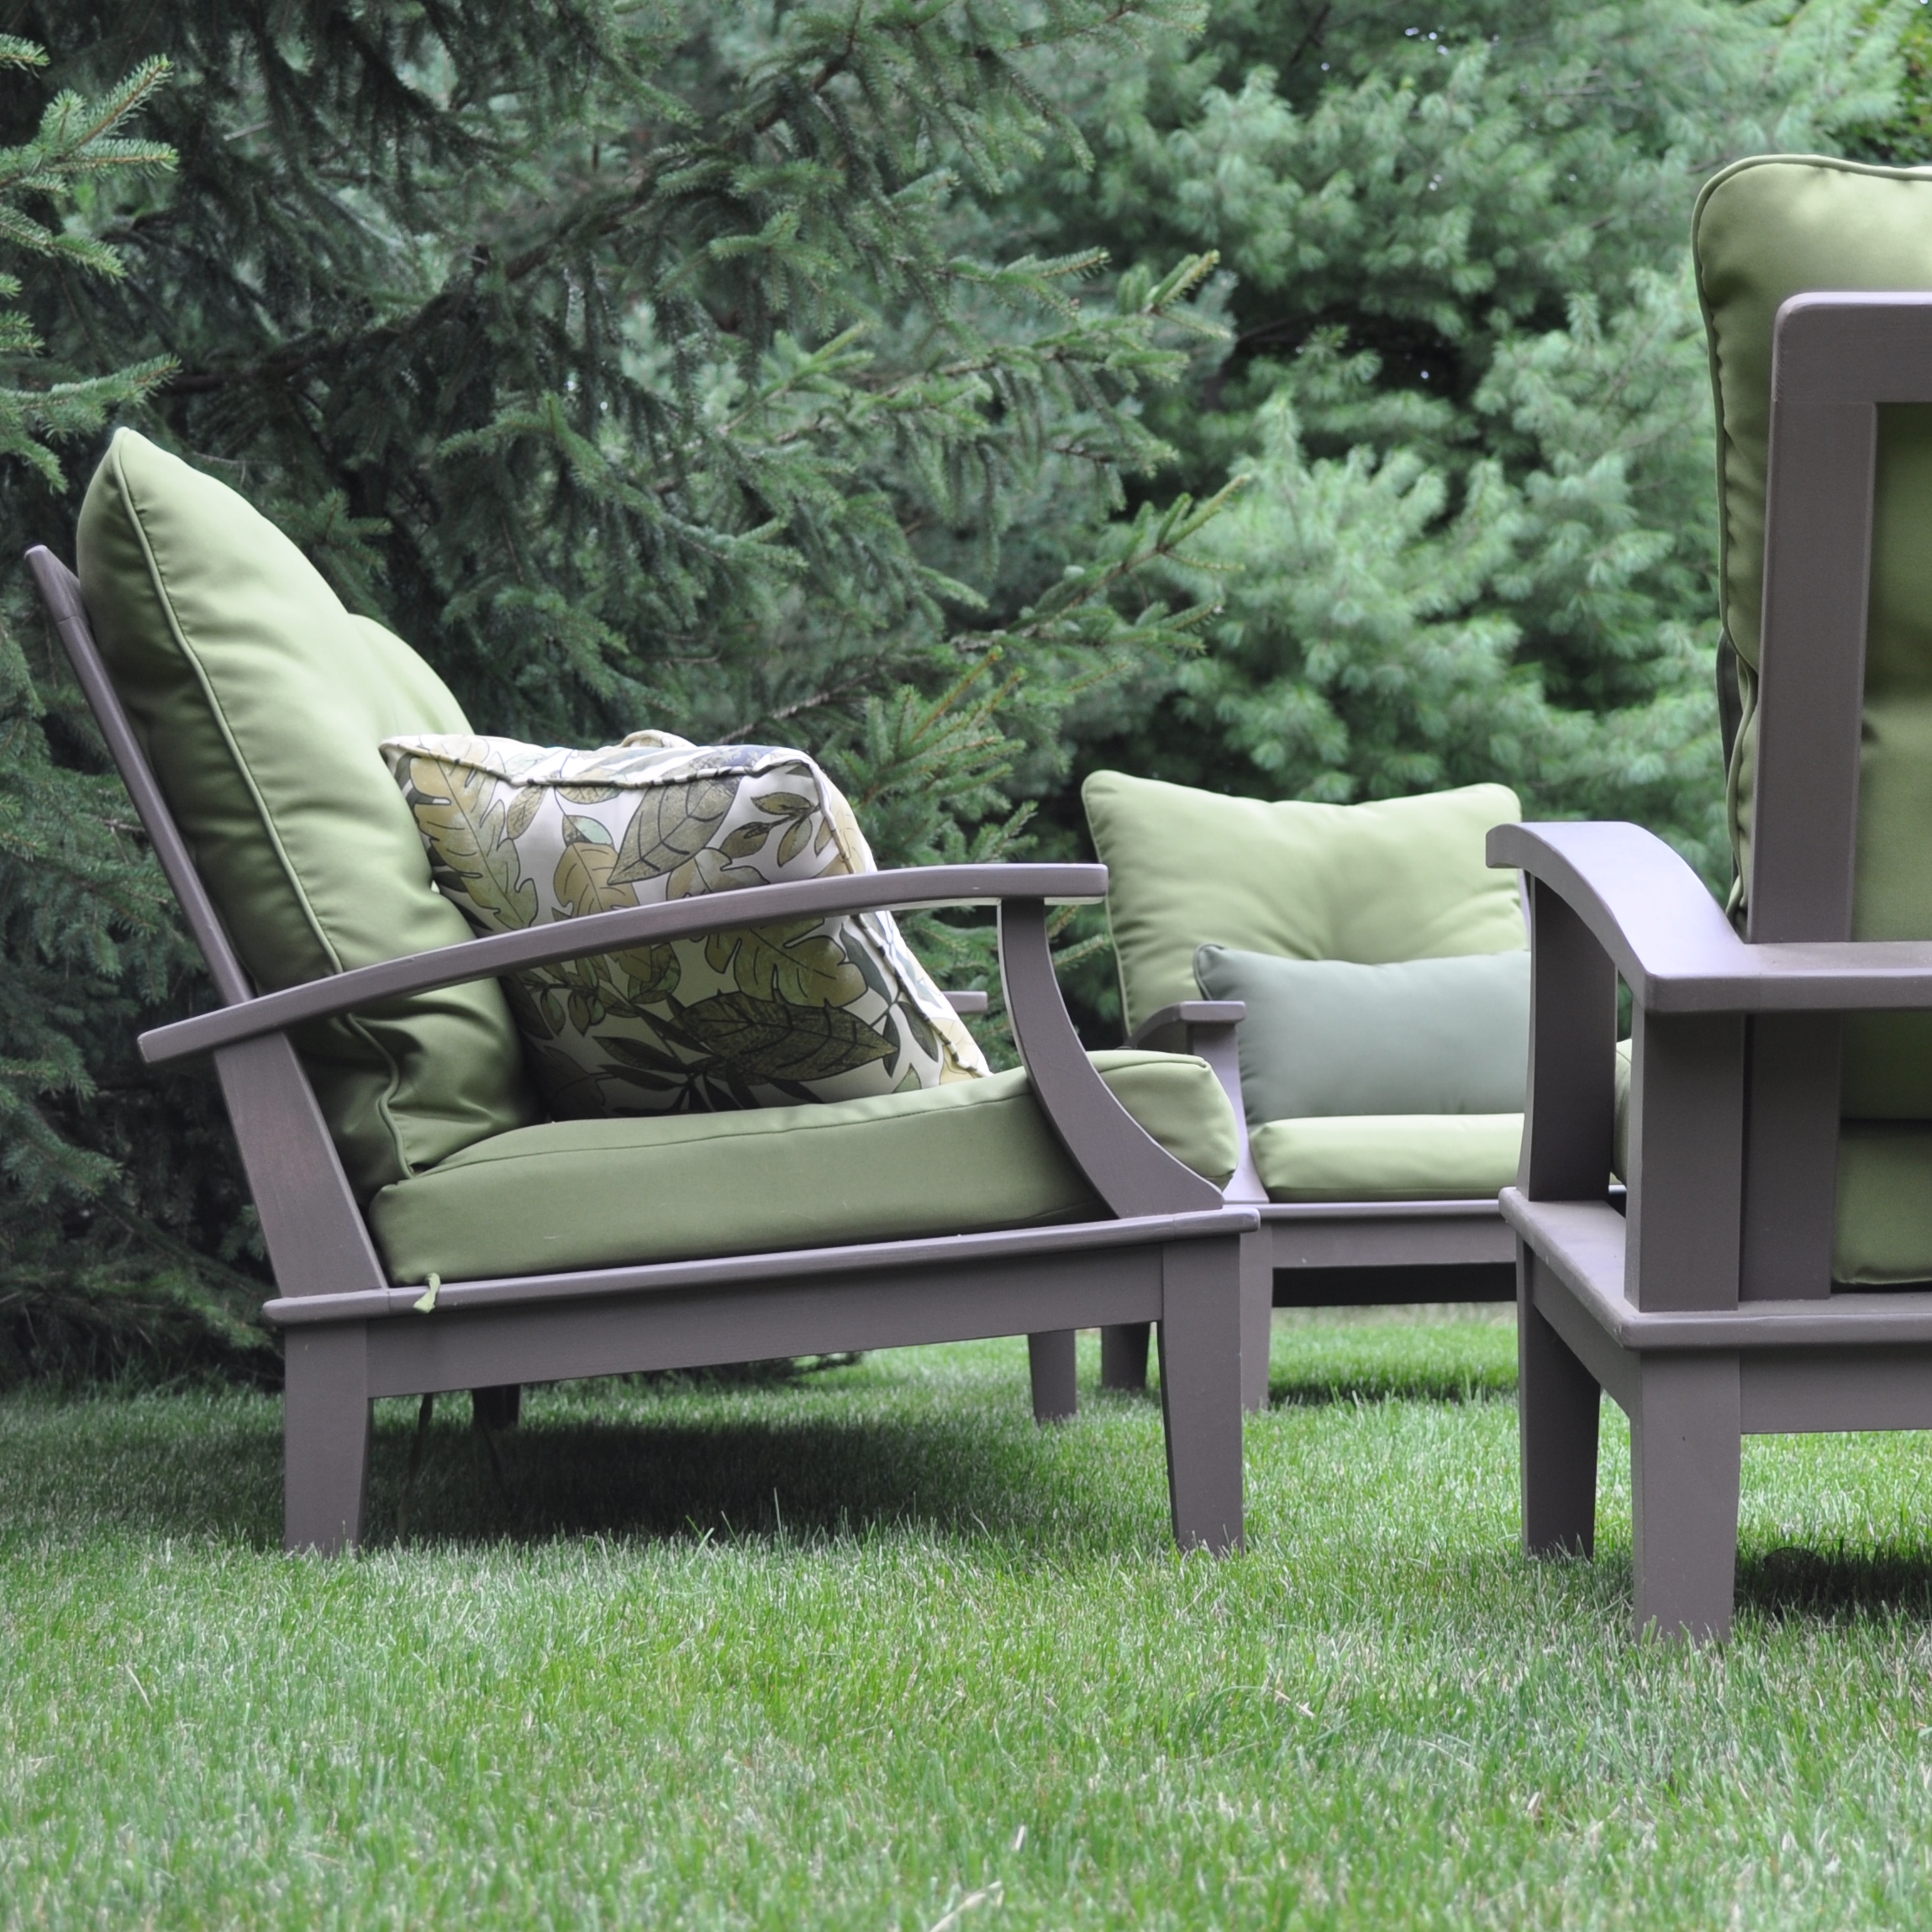 Copy of Cypress Patio Furniture